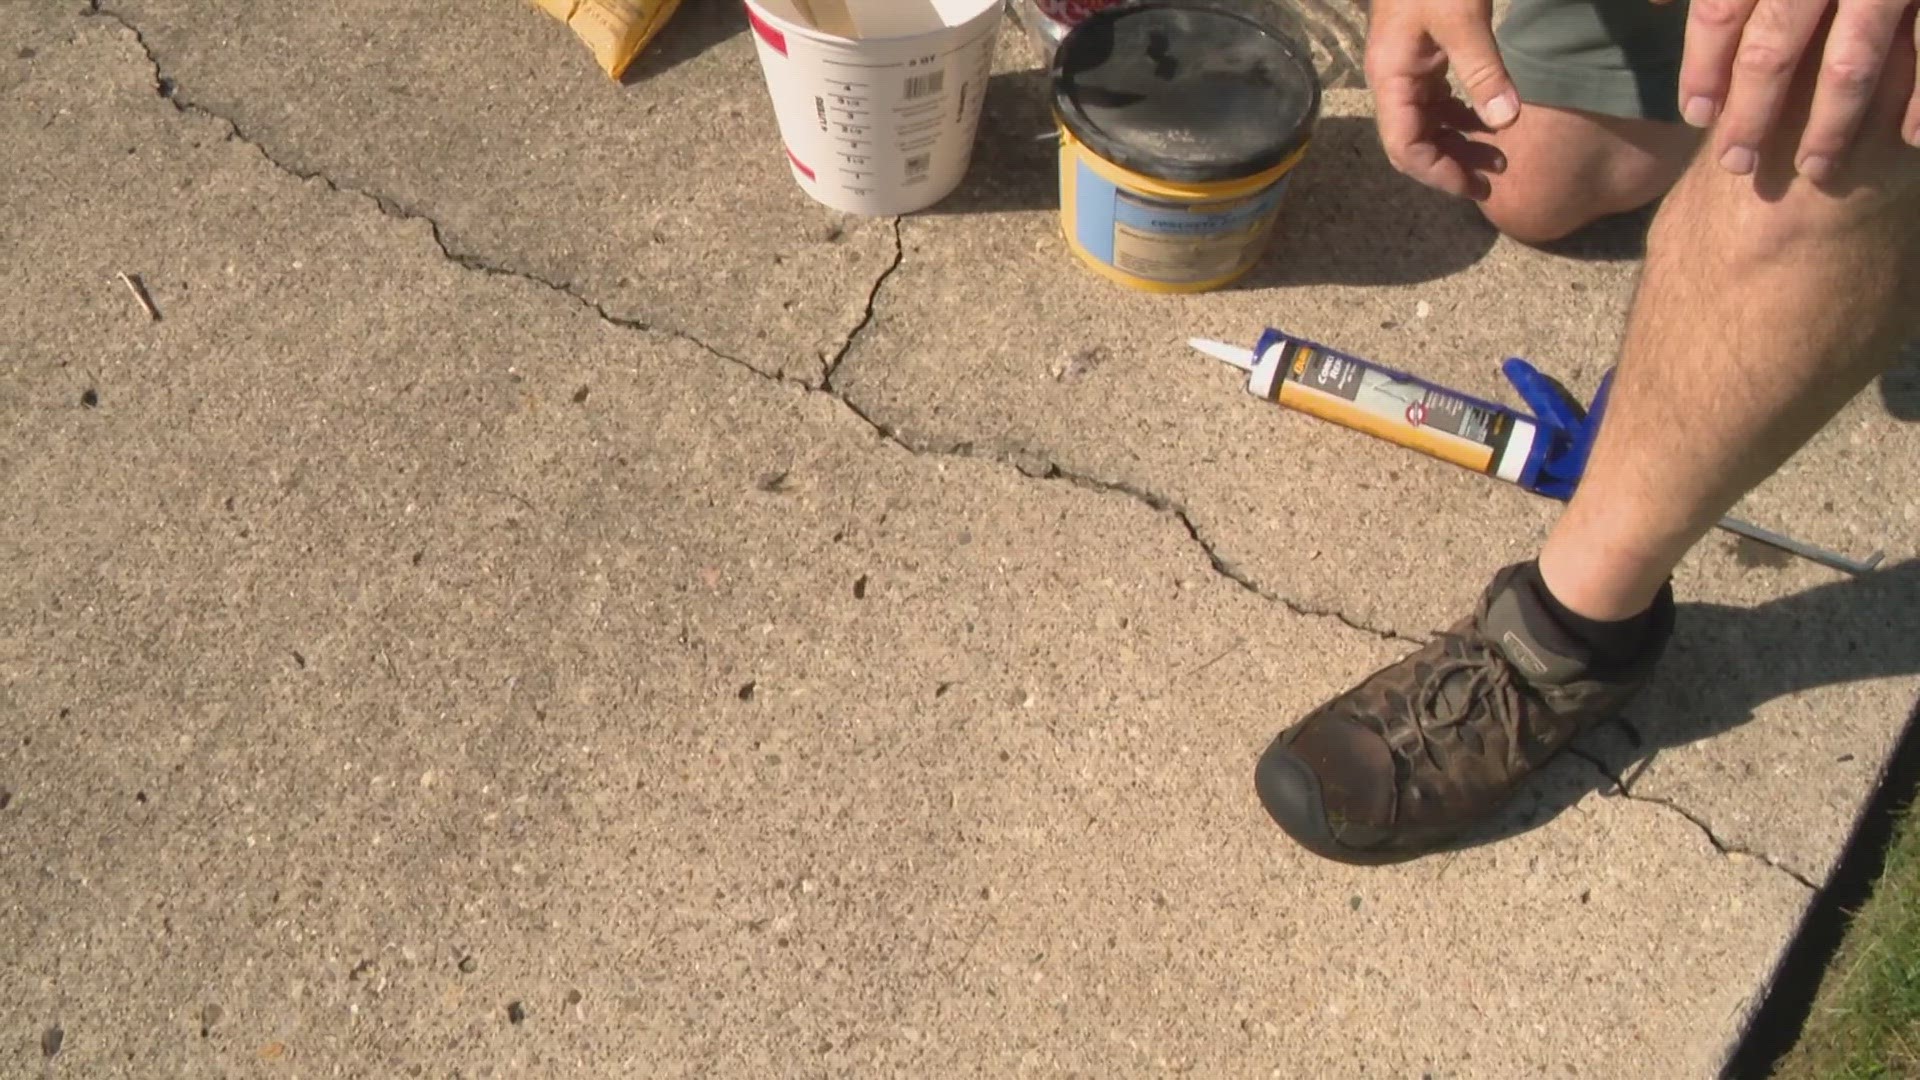 Pat Sullivan has tips on fixing your driveway and sidewalk